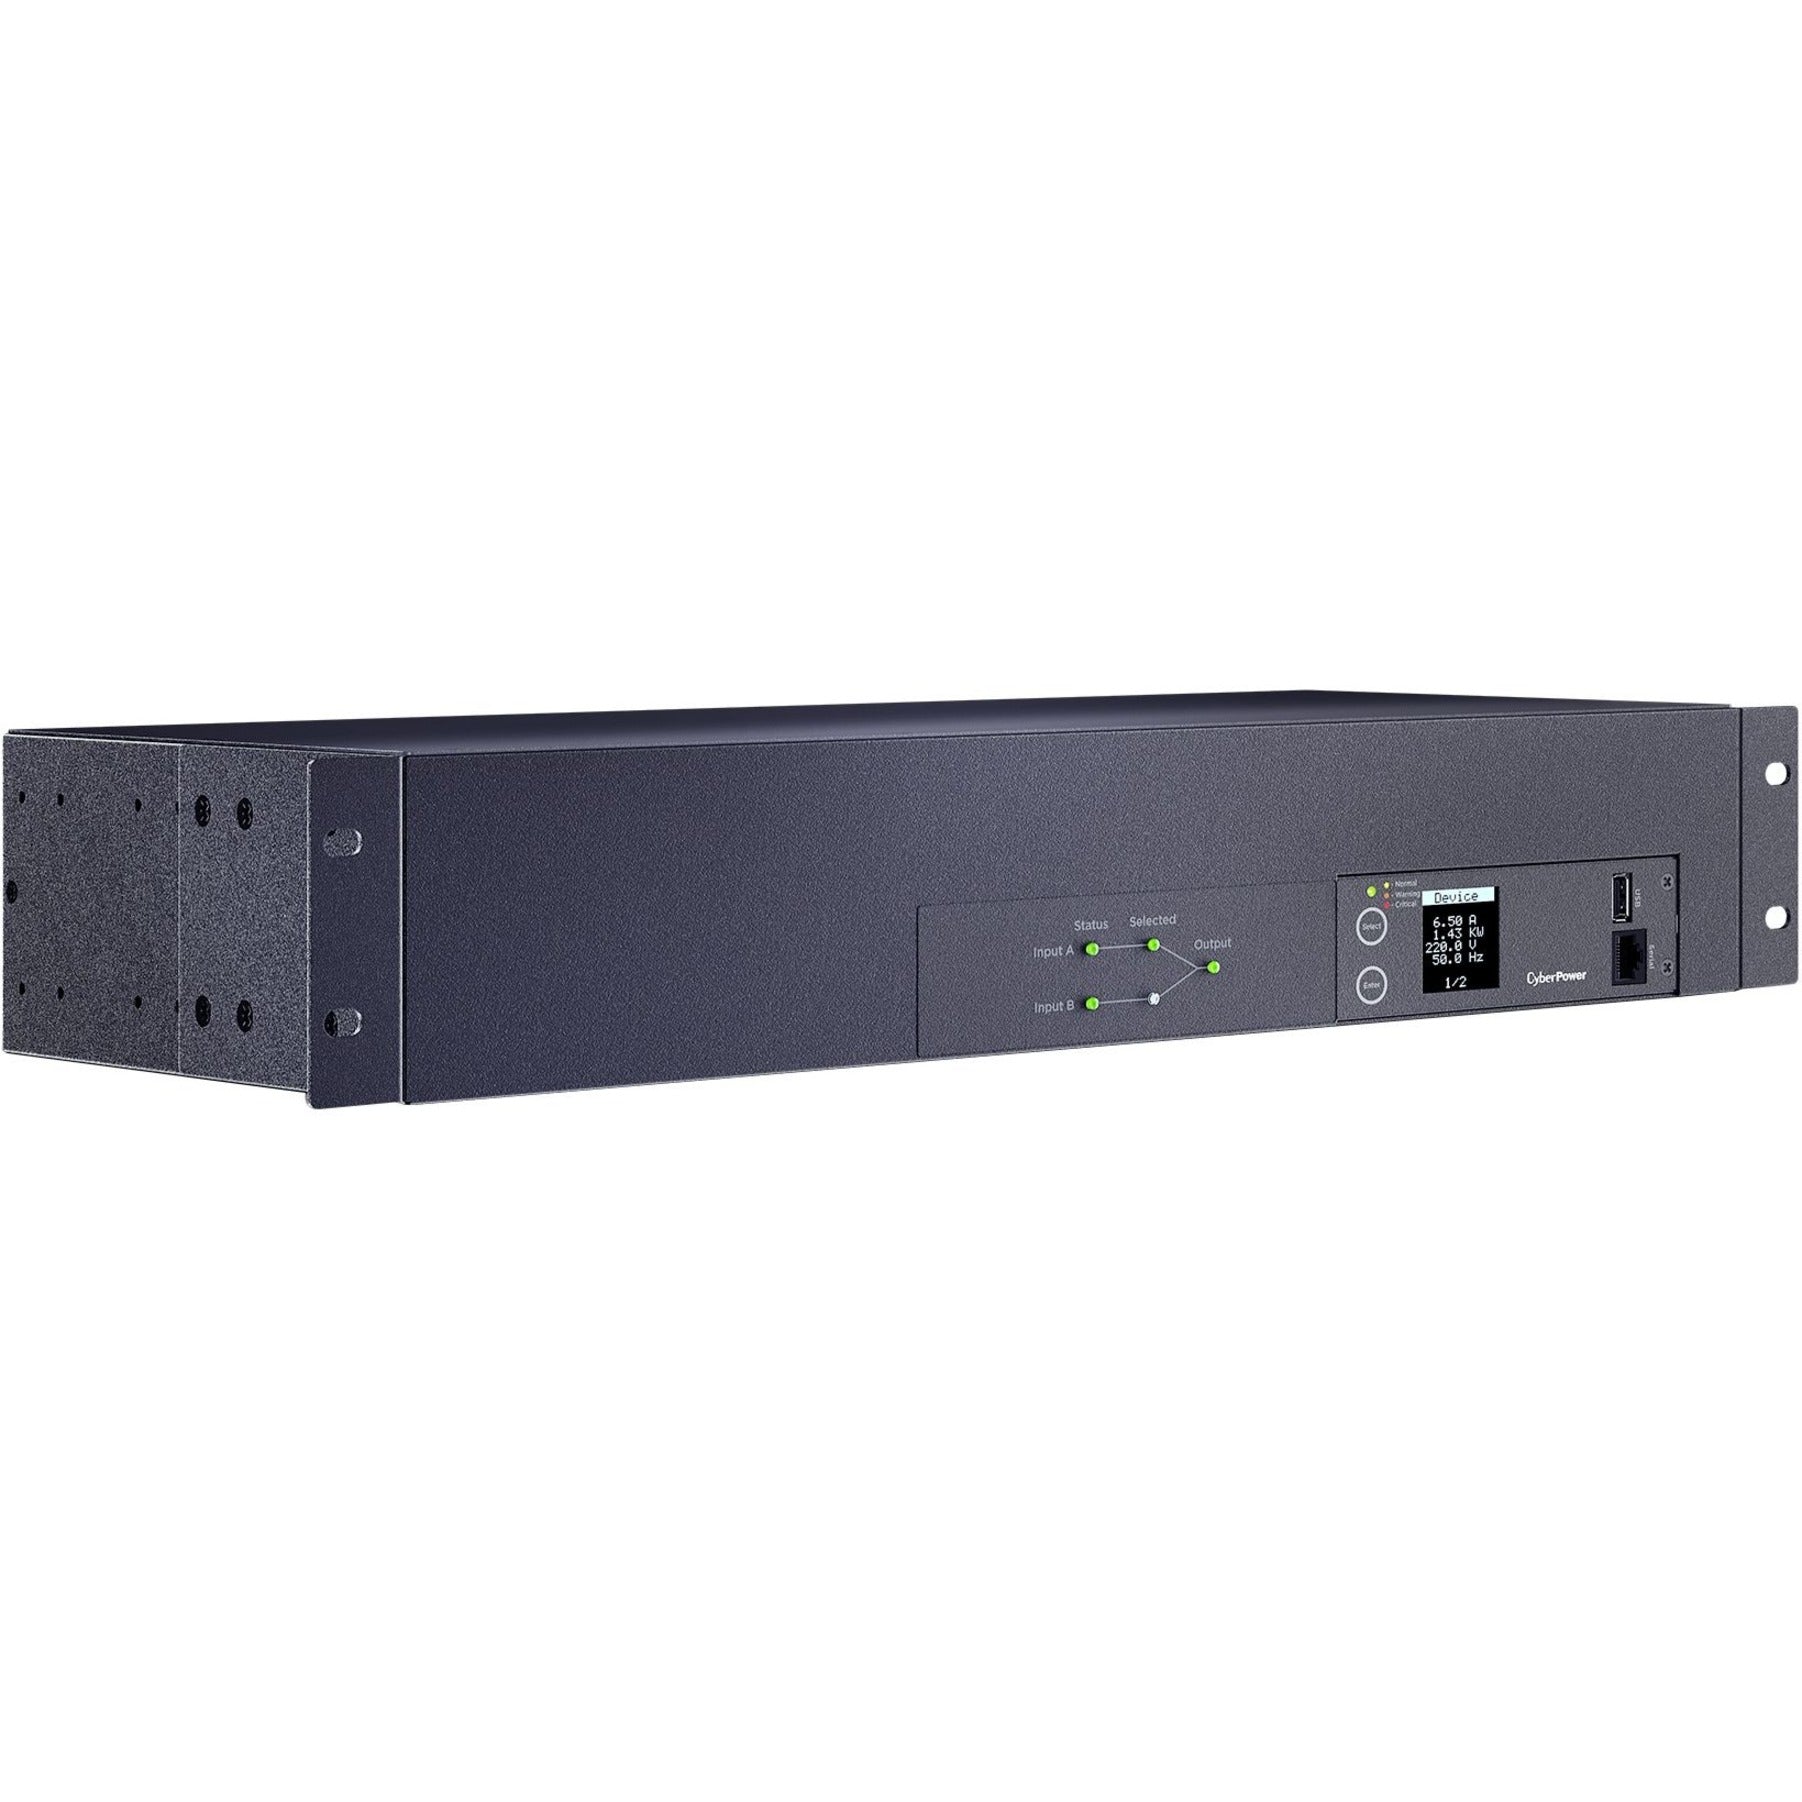 CyberPower PDU24007 Metered ATS PDU 19-Outlets PDU, 30A, 230V AC, Rack-mountable